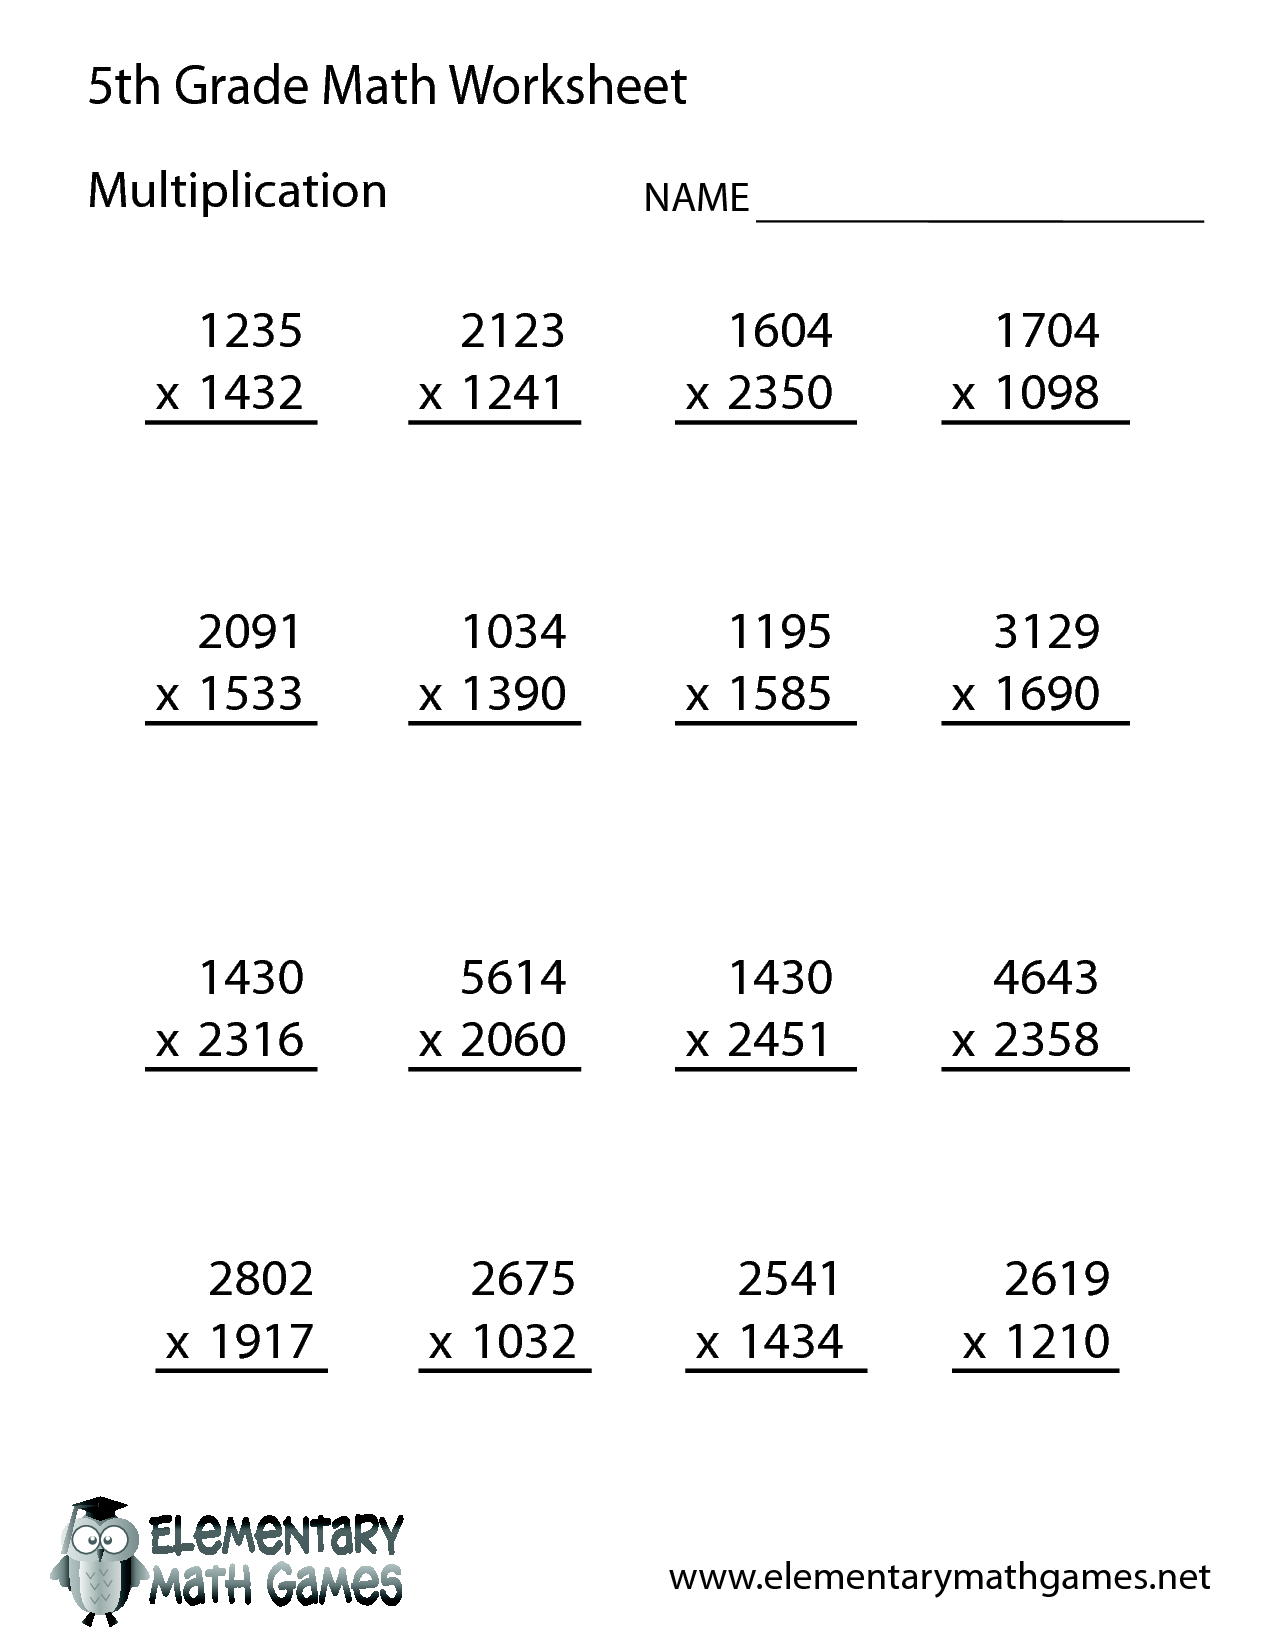 14 Best Images of 5th Grade Math Worksheets With Answer Key - 6th Grade